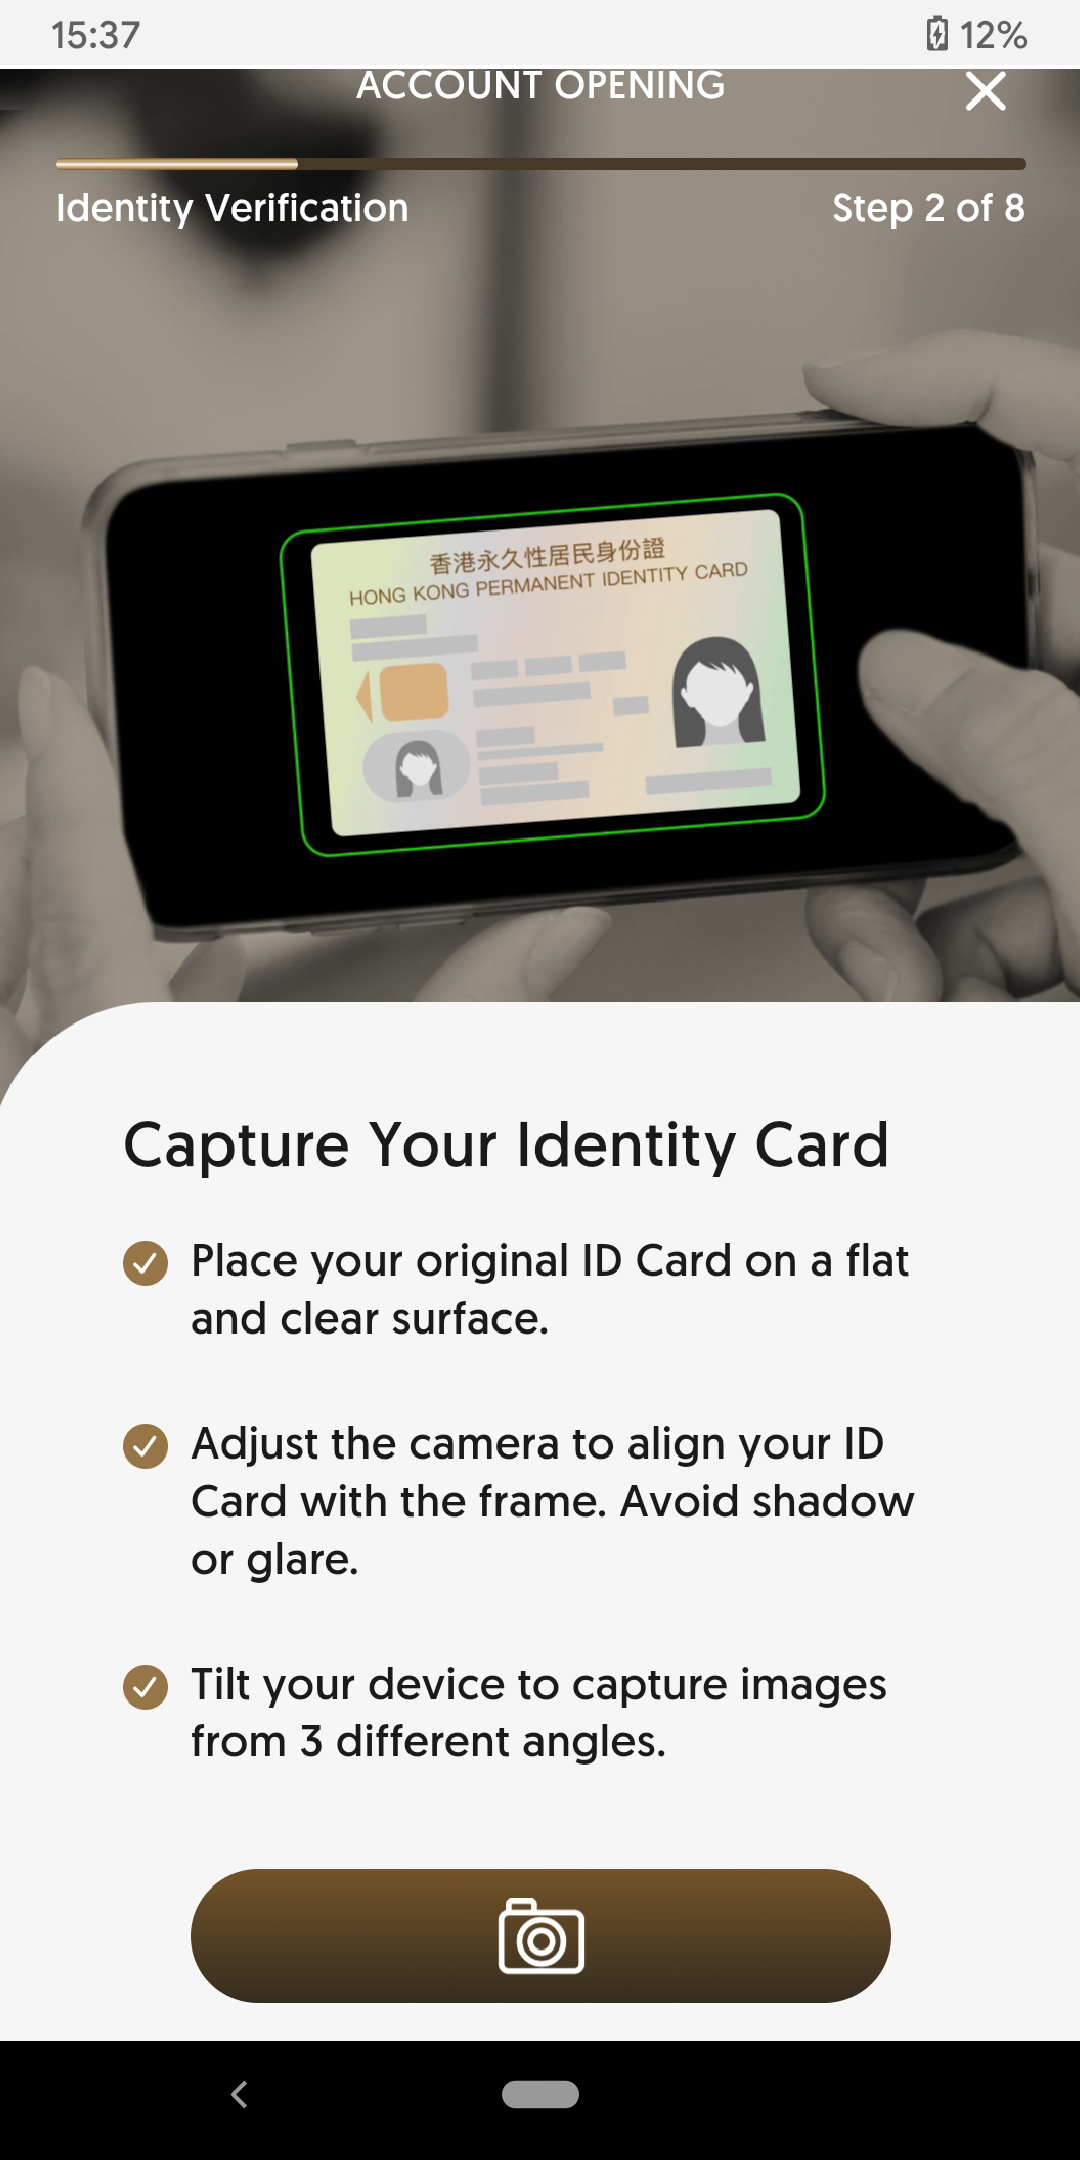 Capture your HKID Card